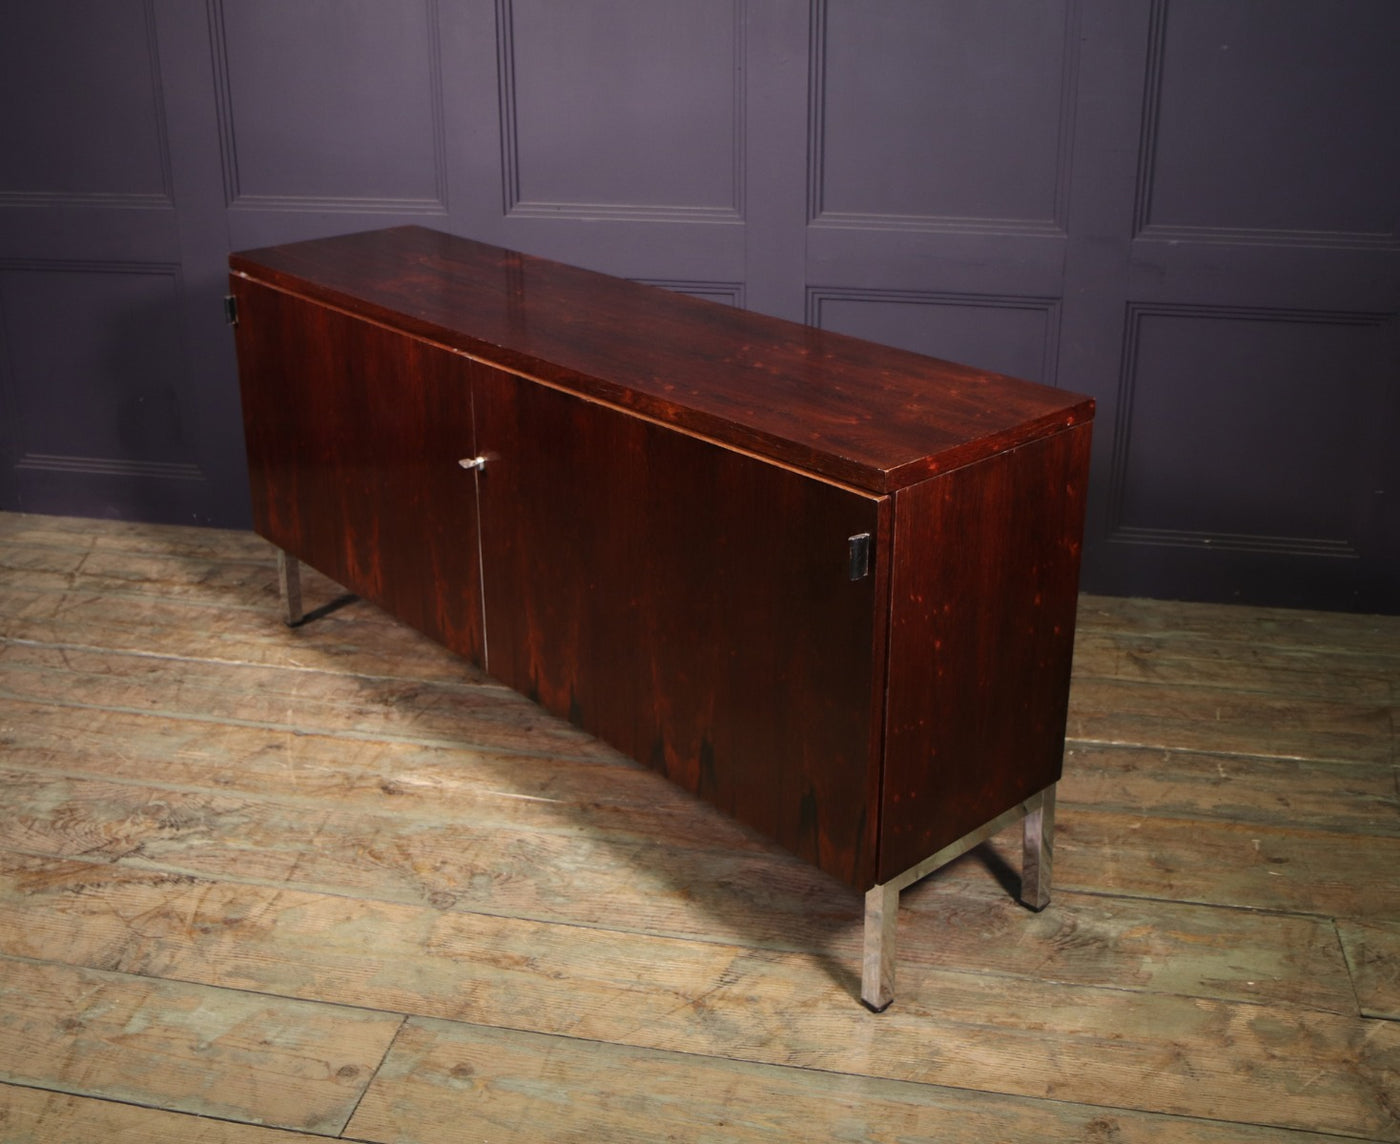 Mid Century Sideboard Attributed to Florence Knoll